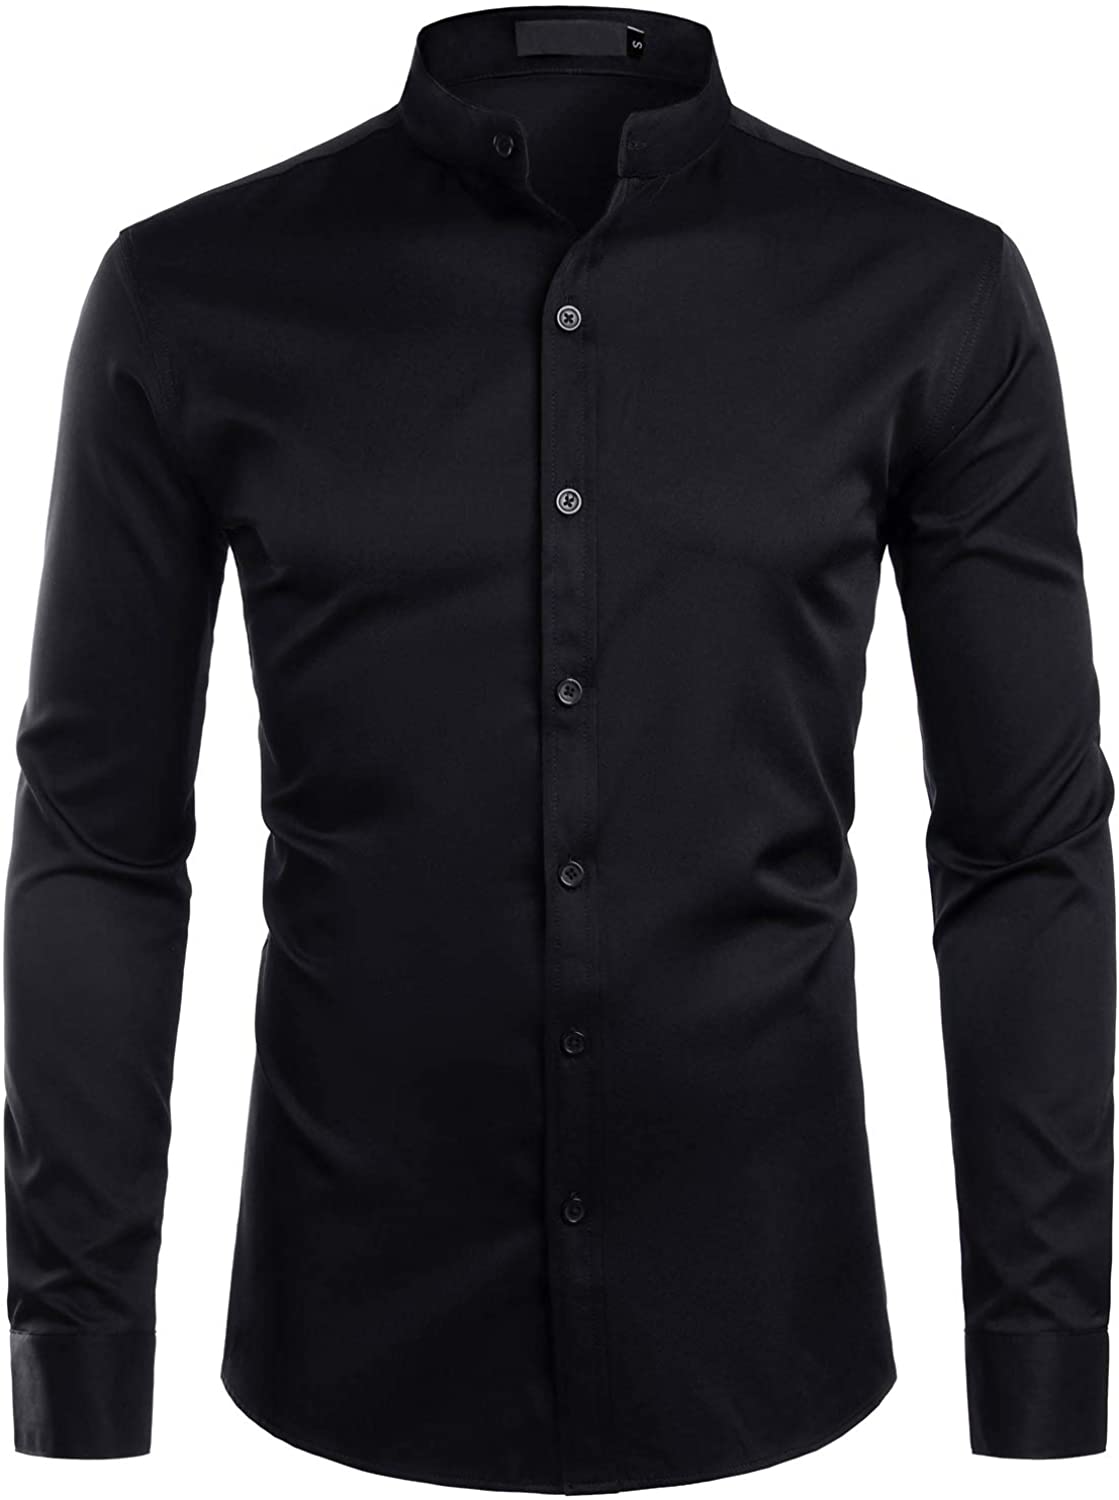 Black Zipper Shirt with Classic Collar – NOT by Jenny Lai